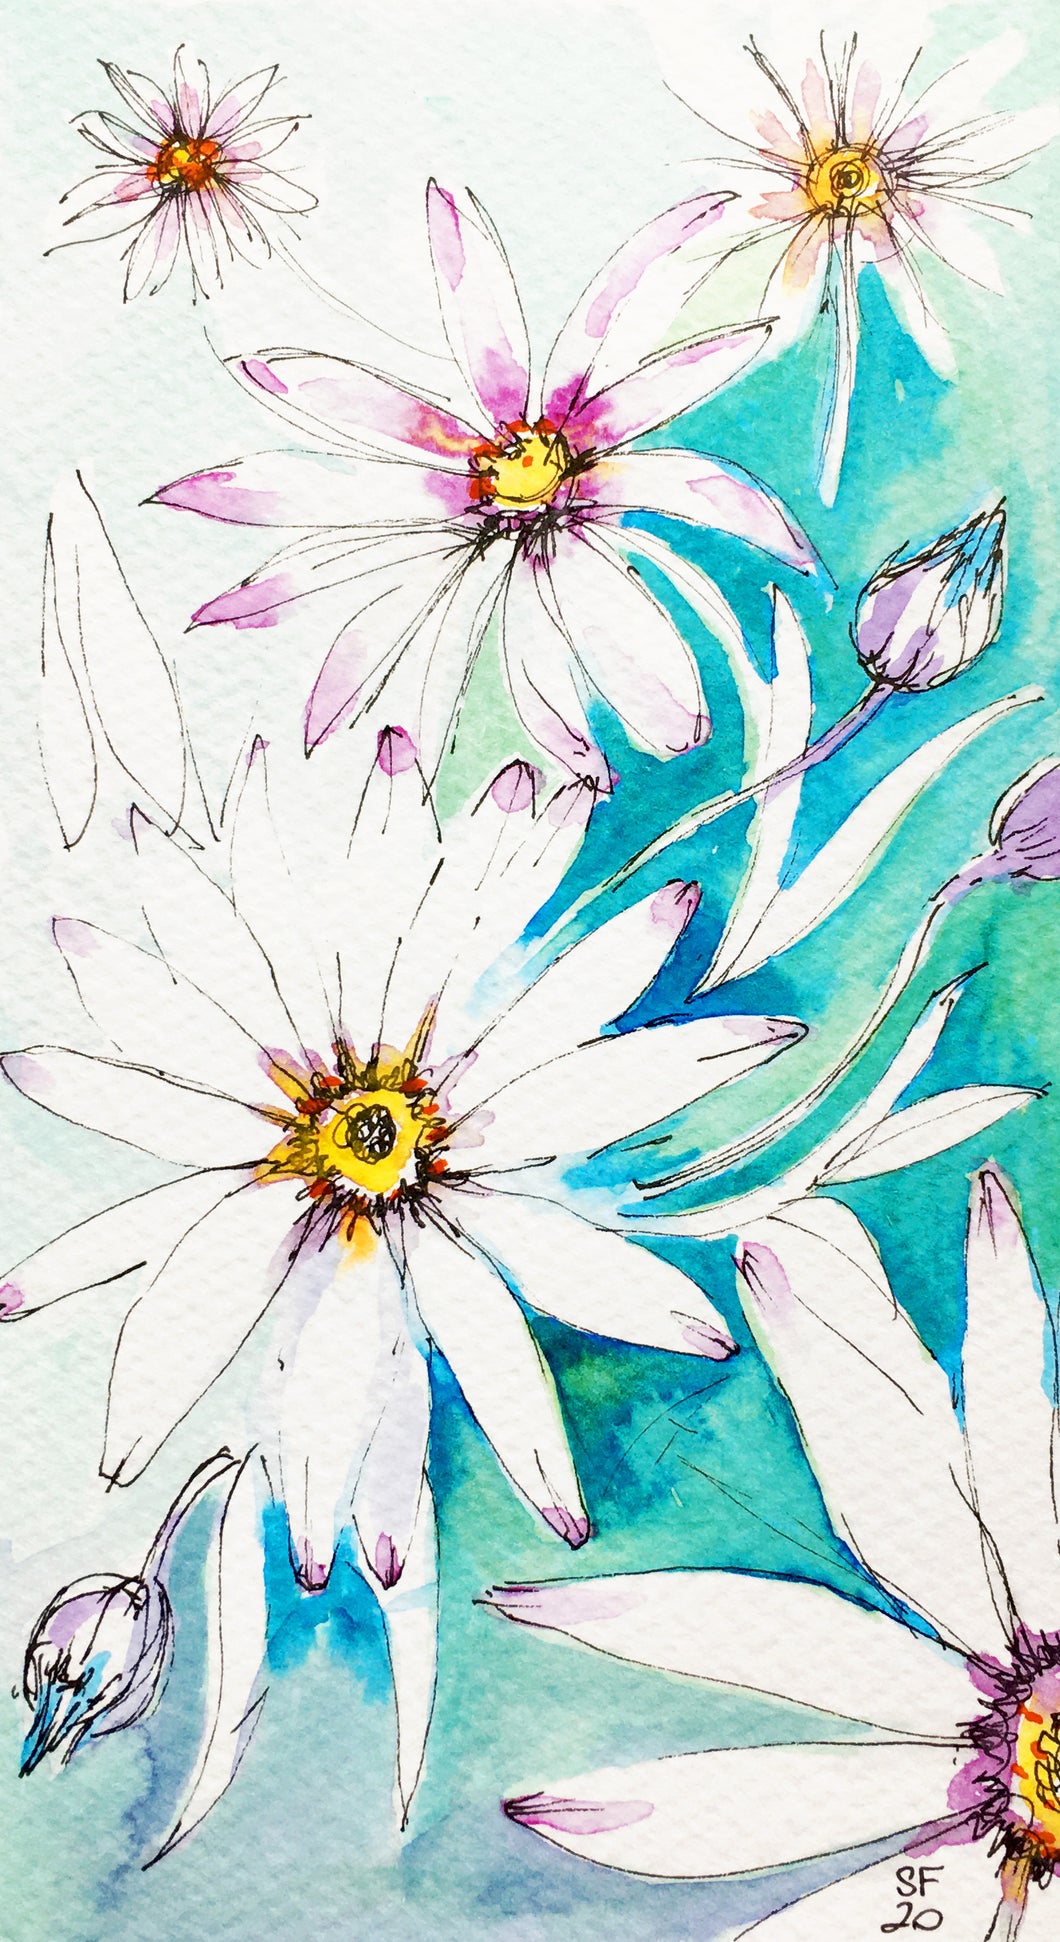 Daisies in Blue - Greeting Card